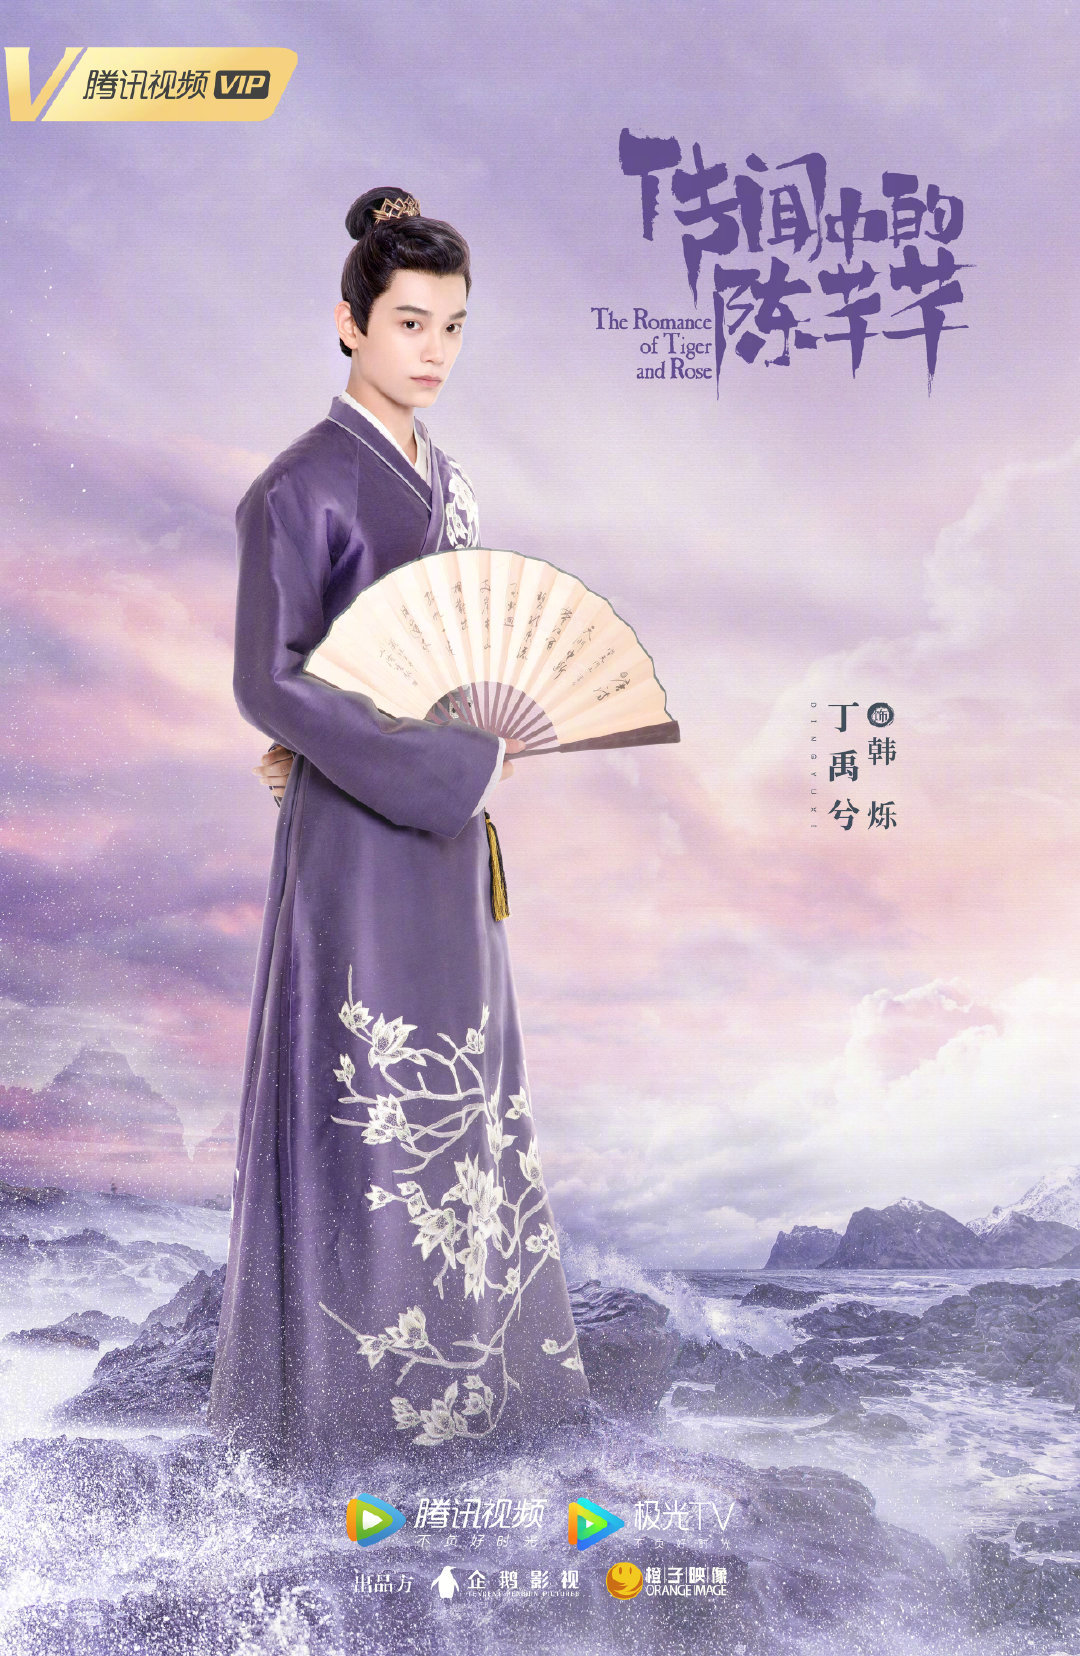 The Romance of Tiger and Rose Poster 8